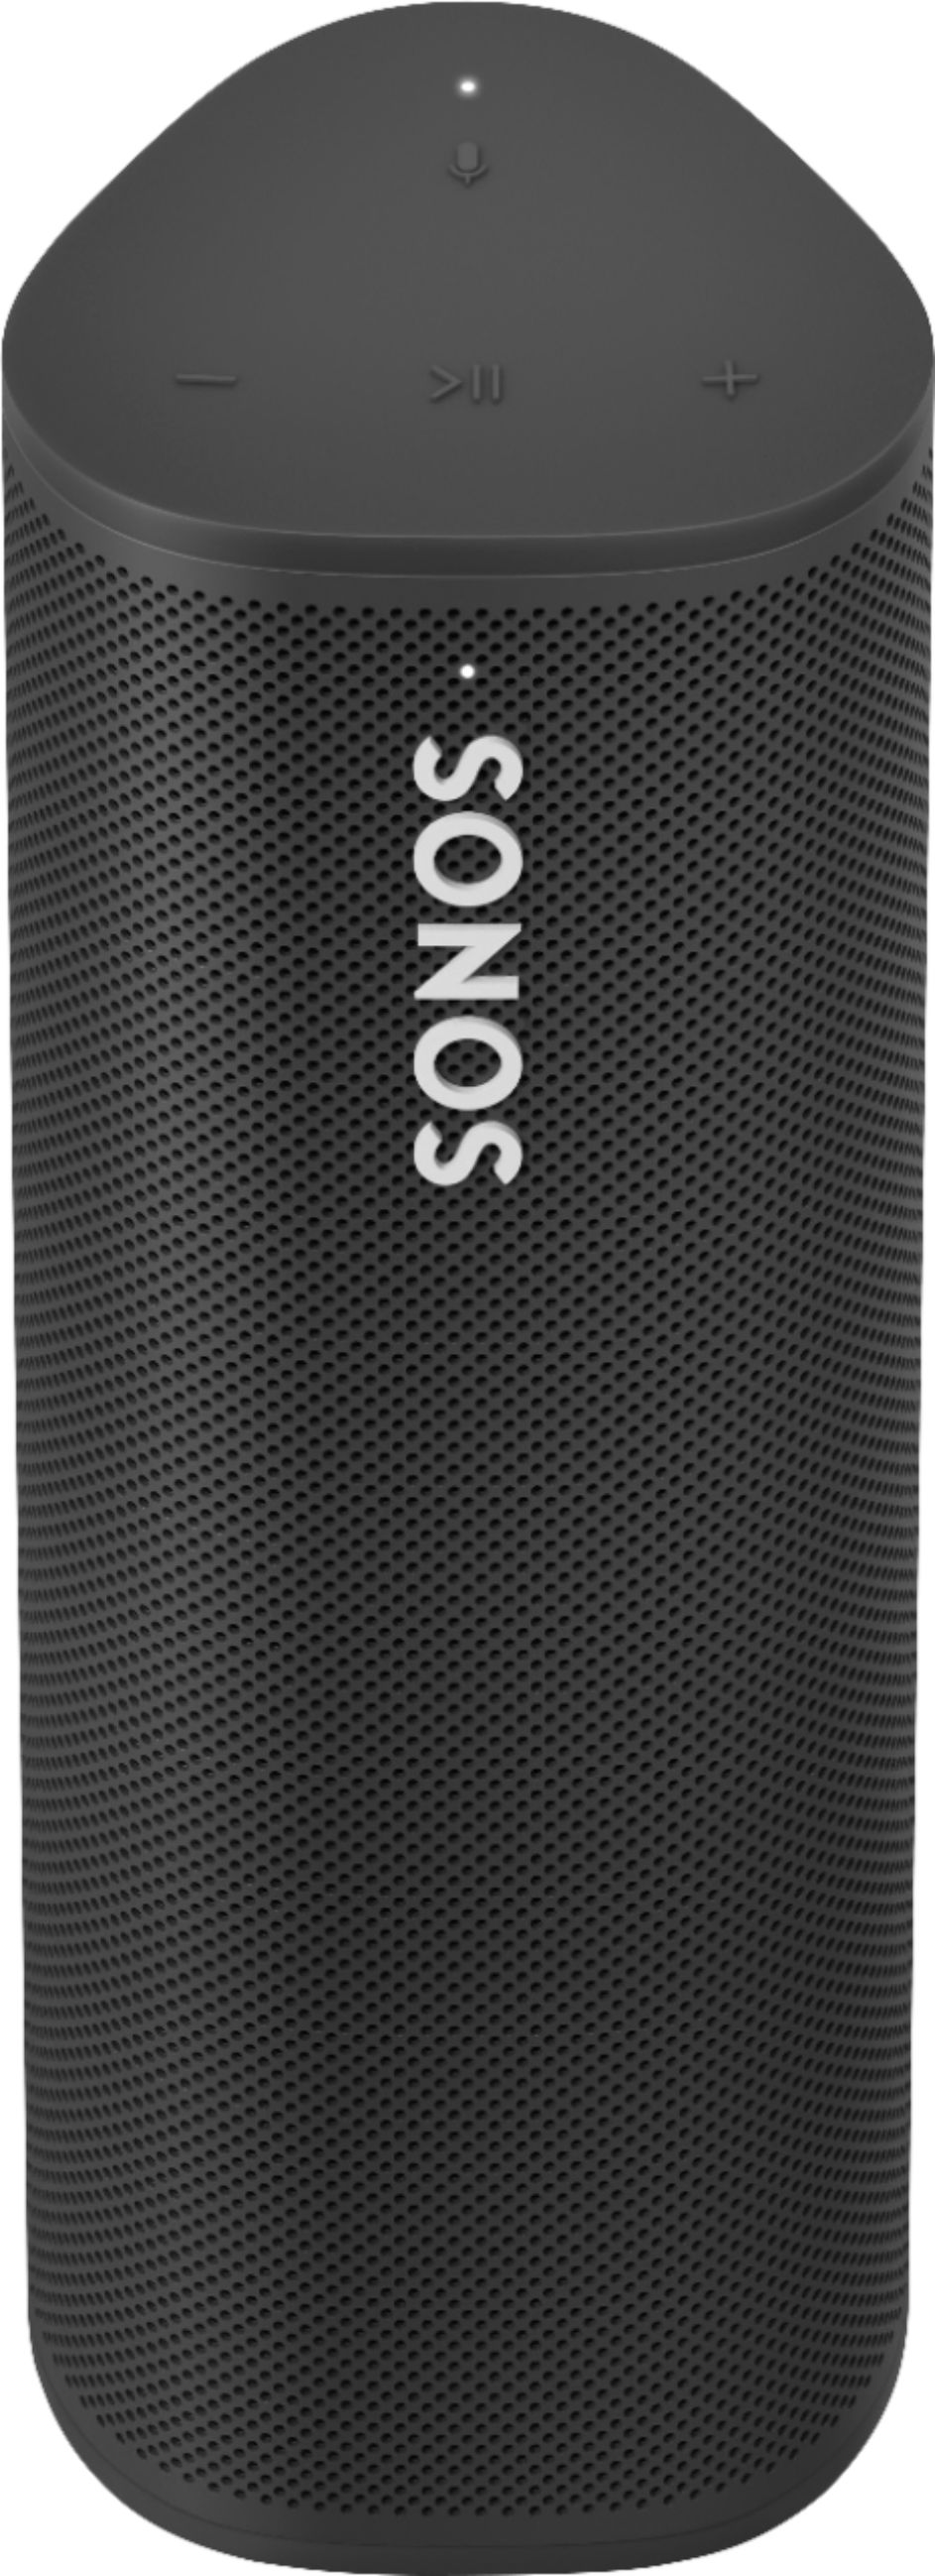 Sonos Roam Smart Portable Wi-Fi and Bluetooth with Amazon and Google Assistant Black ROAM1US1BLK - Best Buy